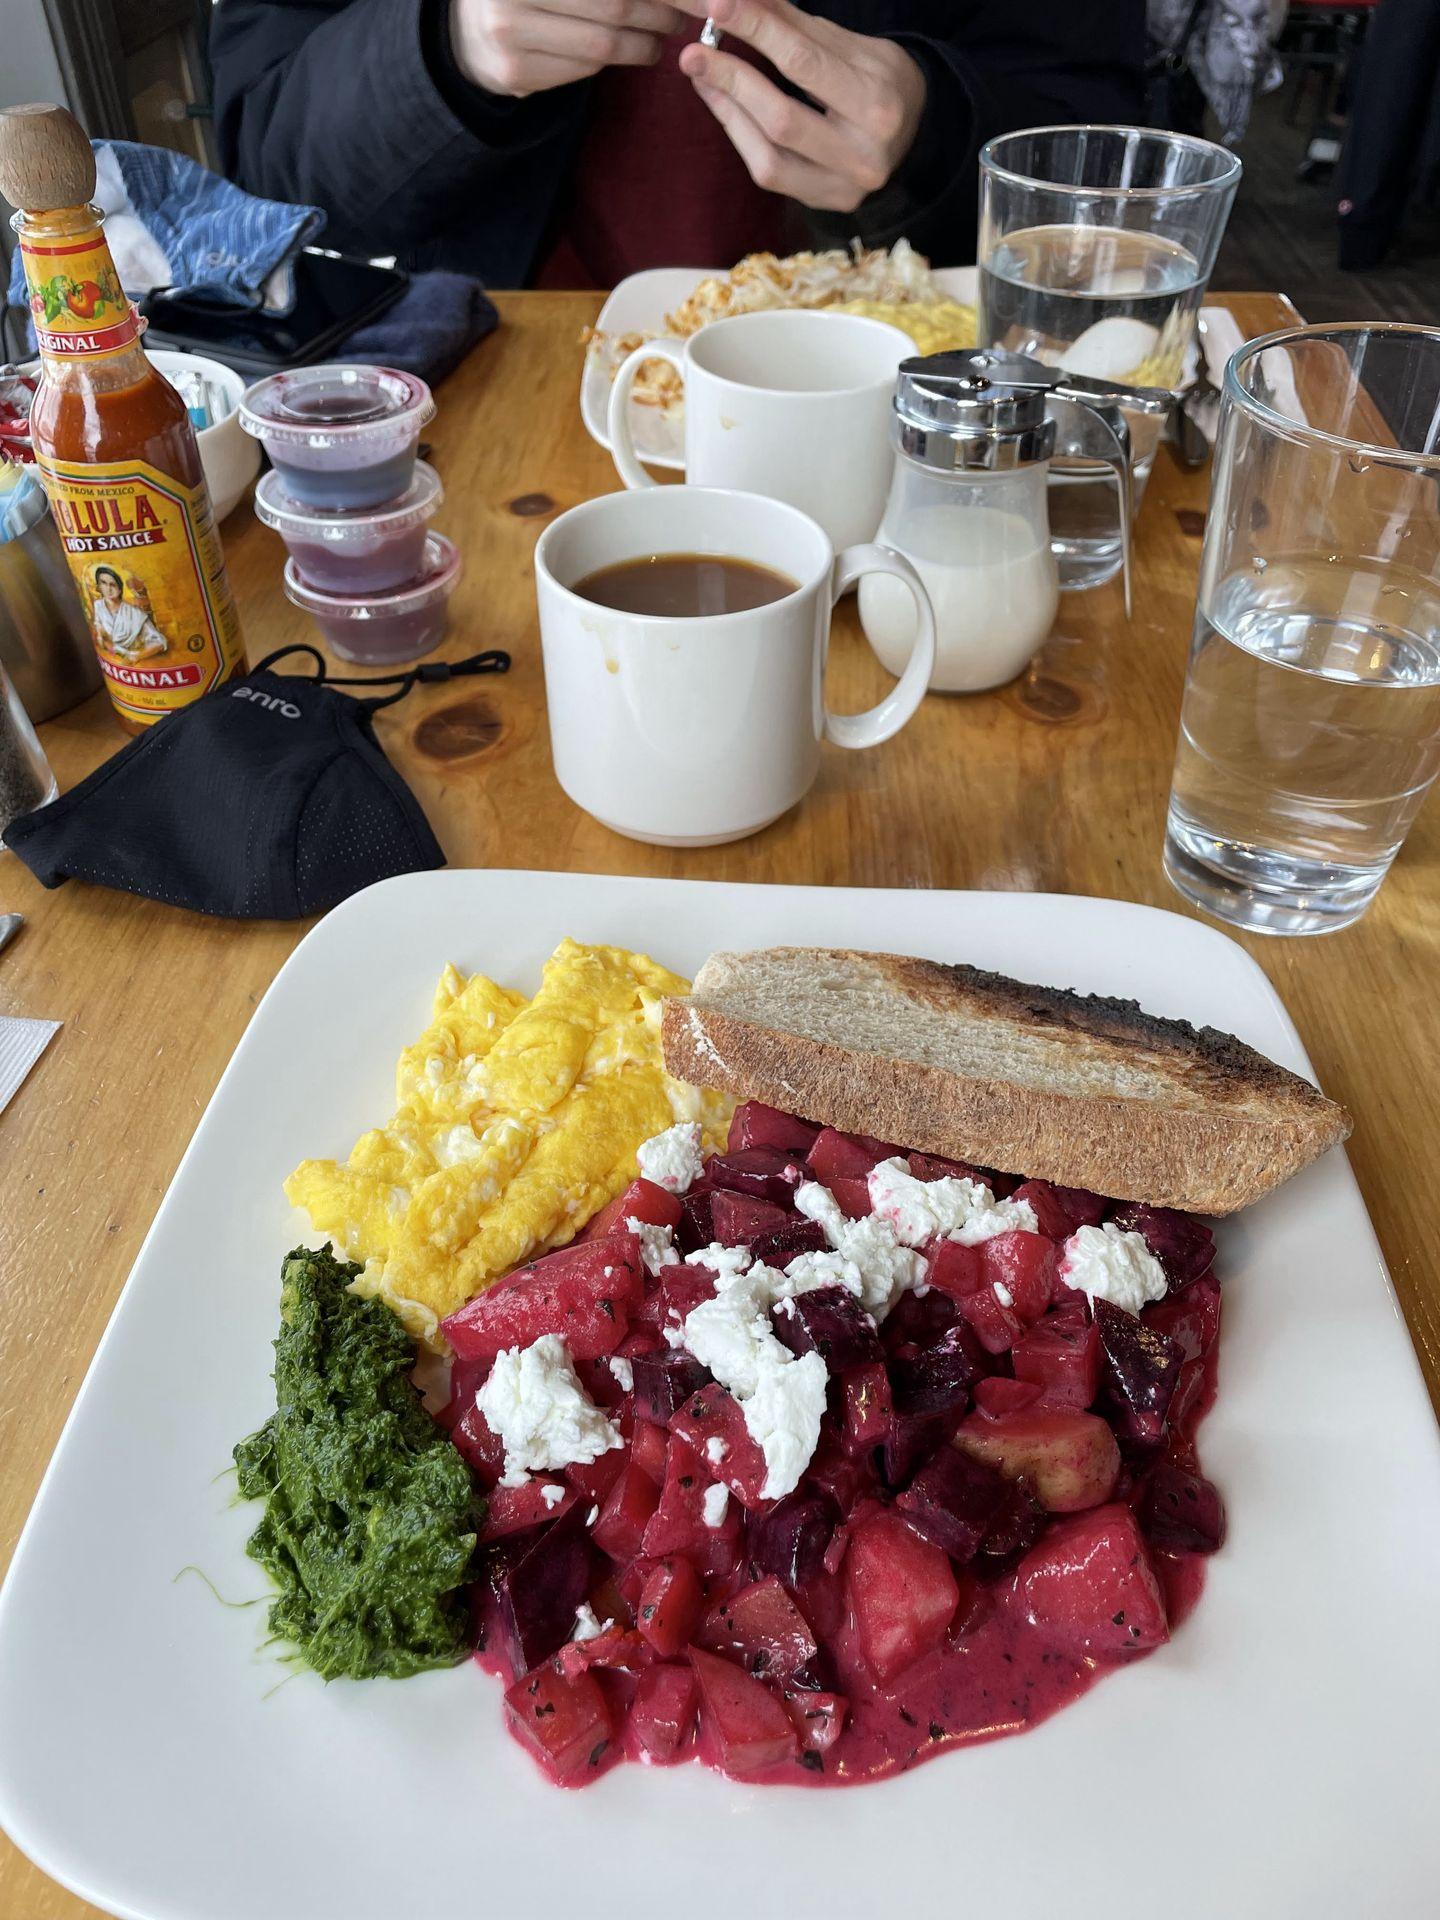 Brunch at Bread and Salt. The plate includes scrambled eggs, a beet and potato hash with feta cheese and toast.